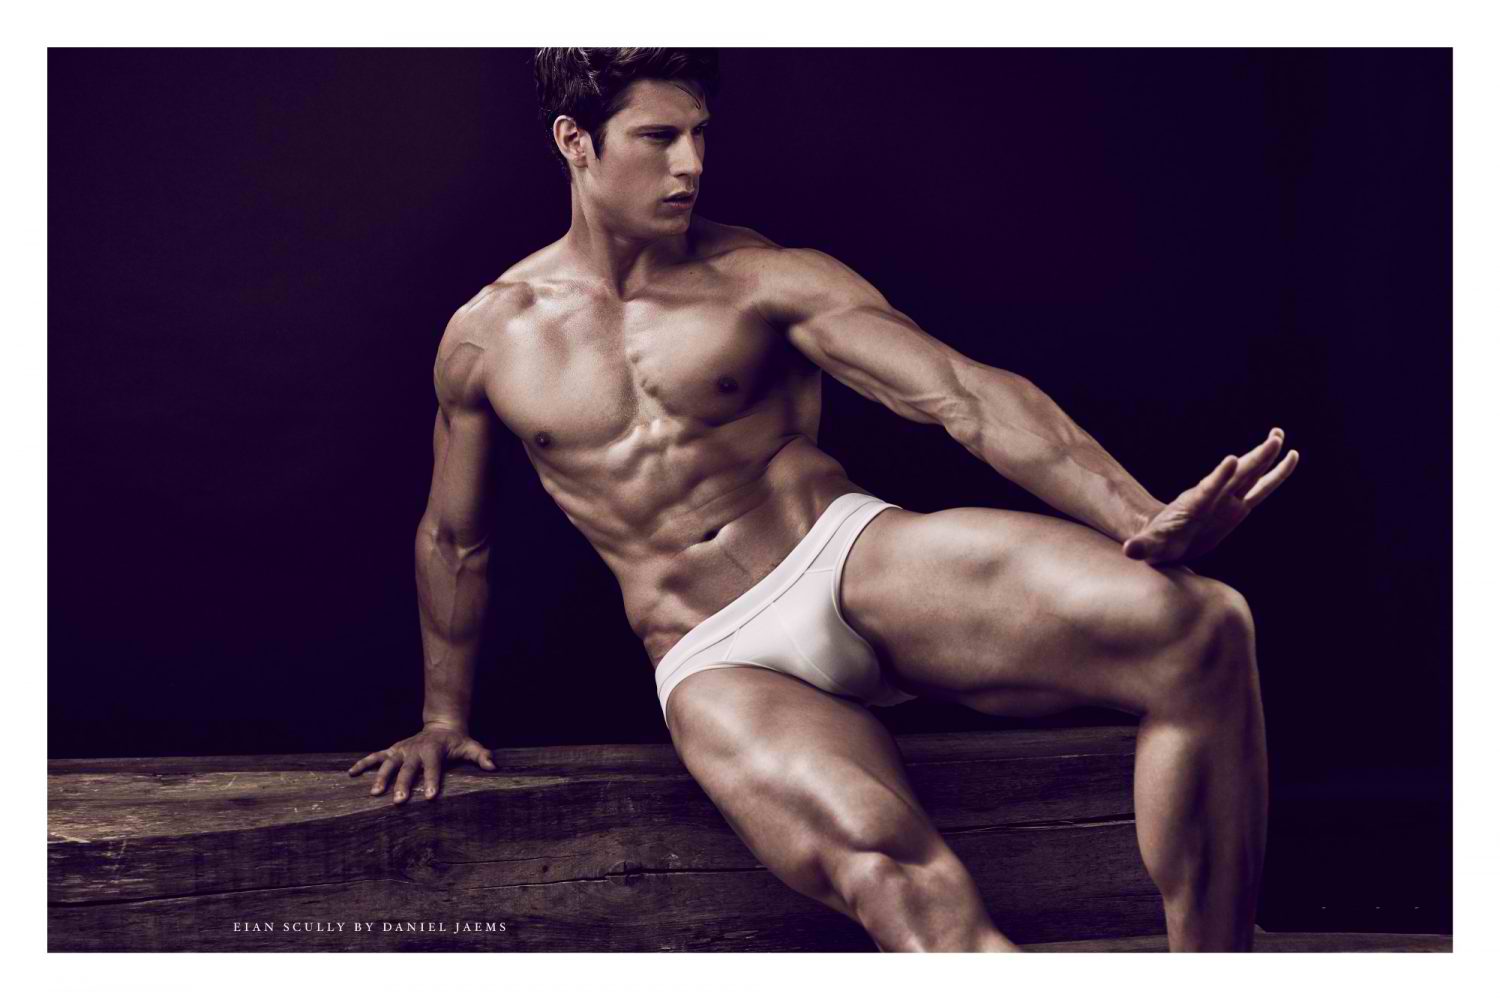 Eian-Scully-by-Daniel-Jaems-Obsession-No17-015-1500x1000